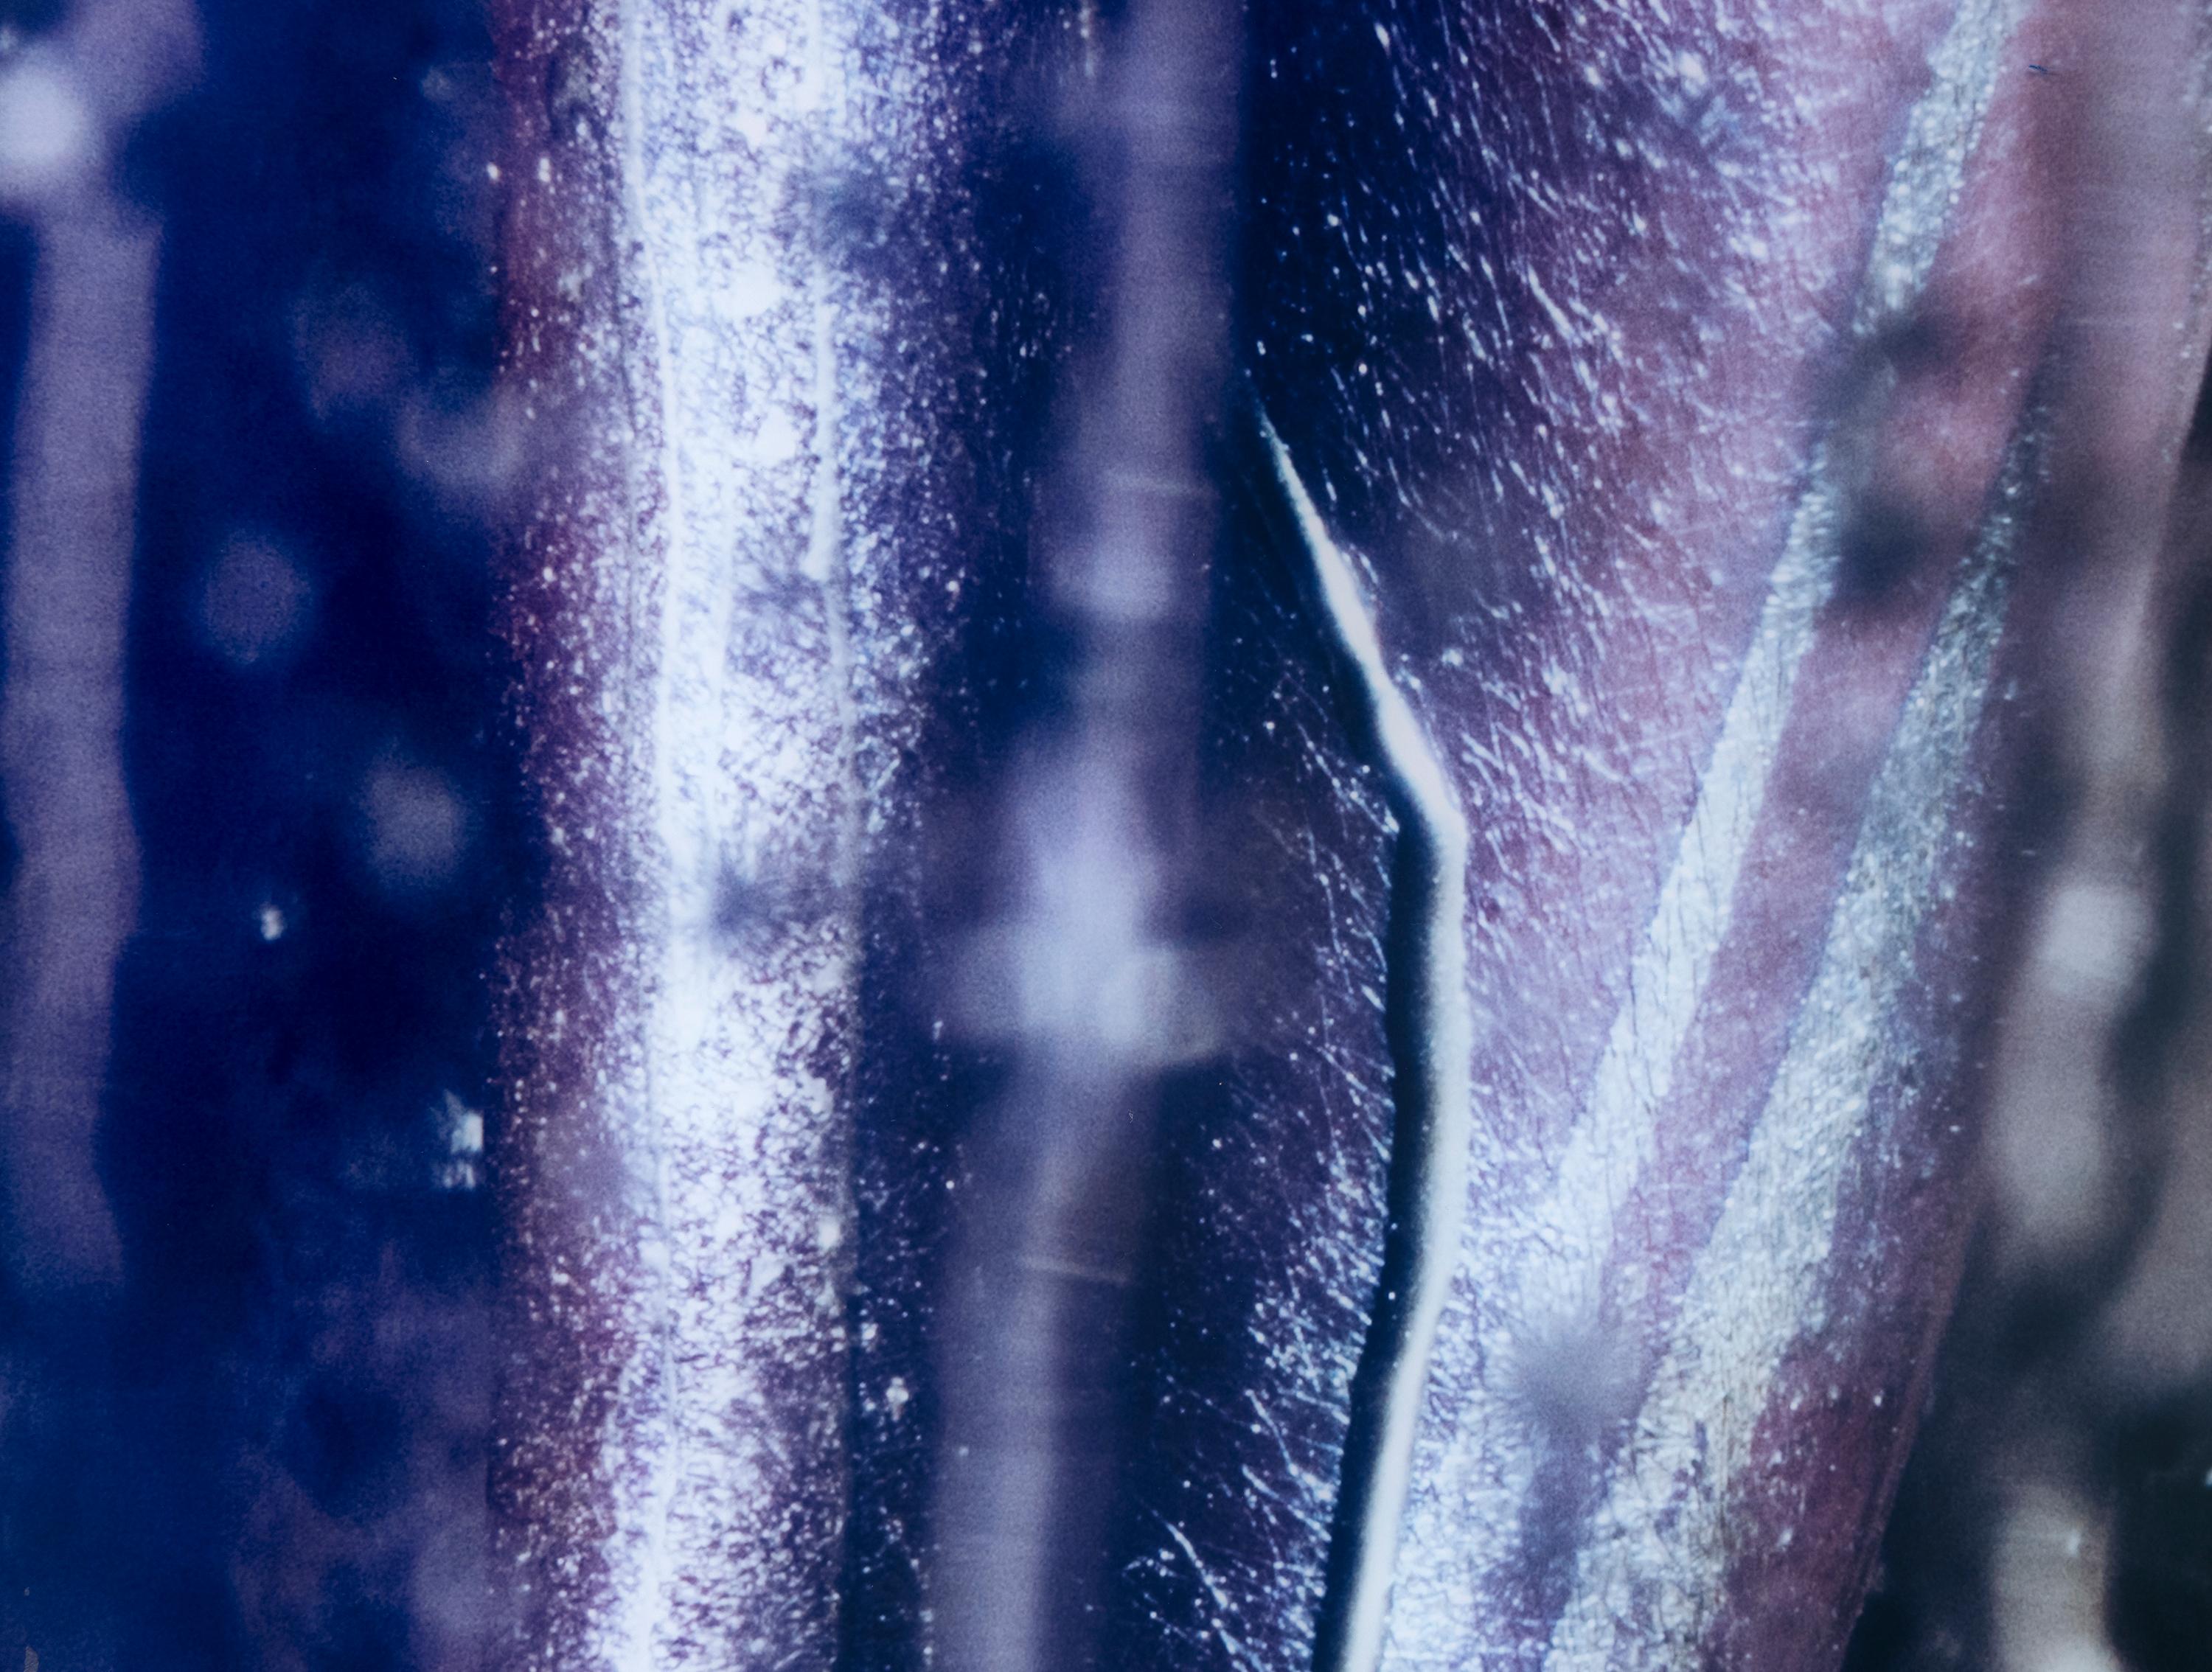 After Hours - Photorealist Photograph by Marilyn Minter